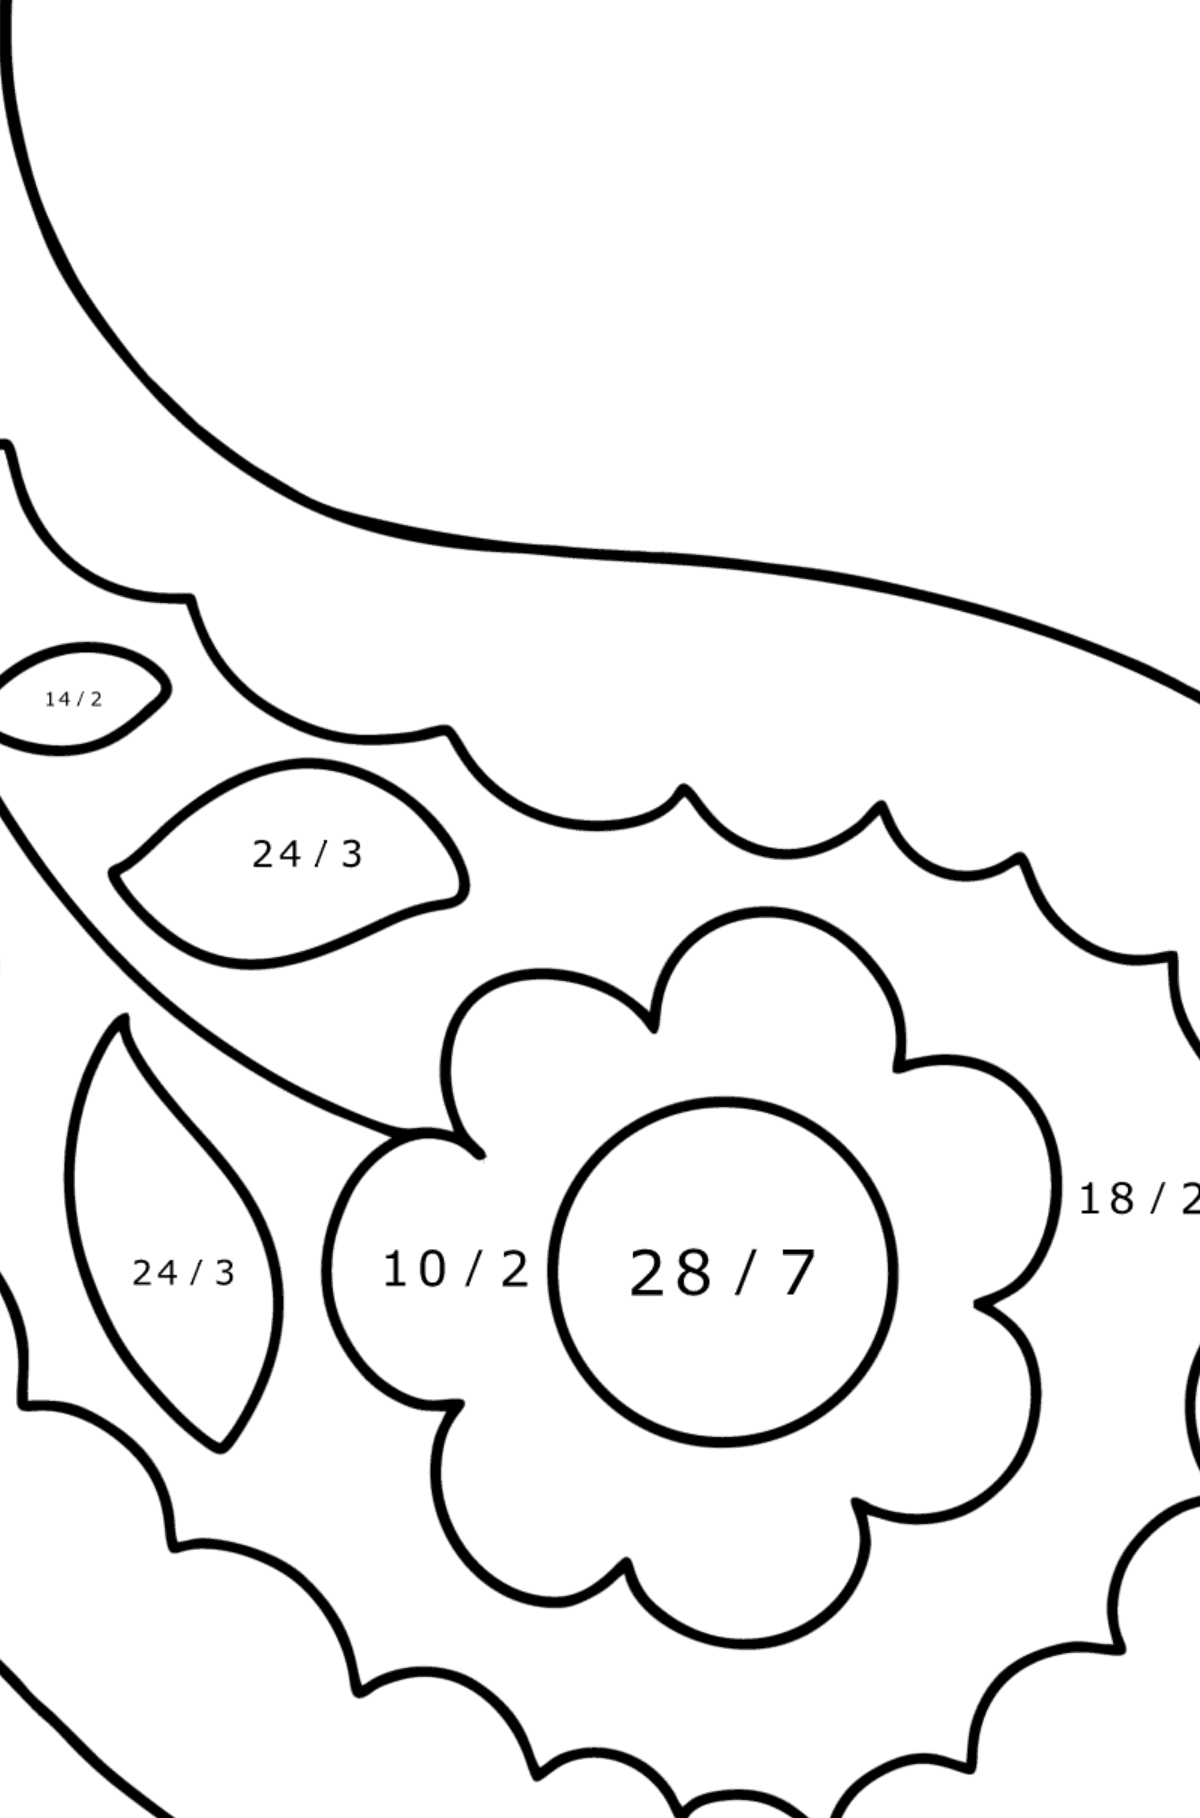 Paisley coloring page for baby - Math Coloring - Division for Kids